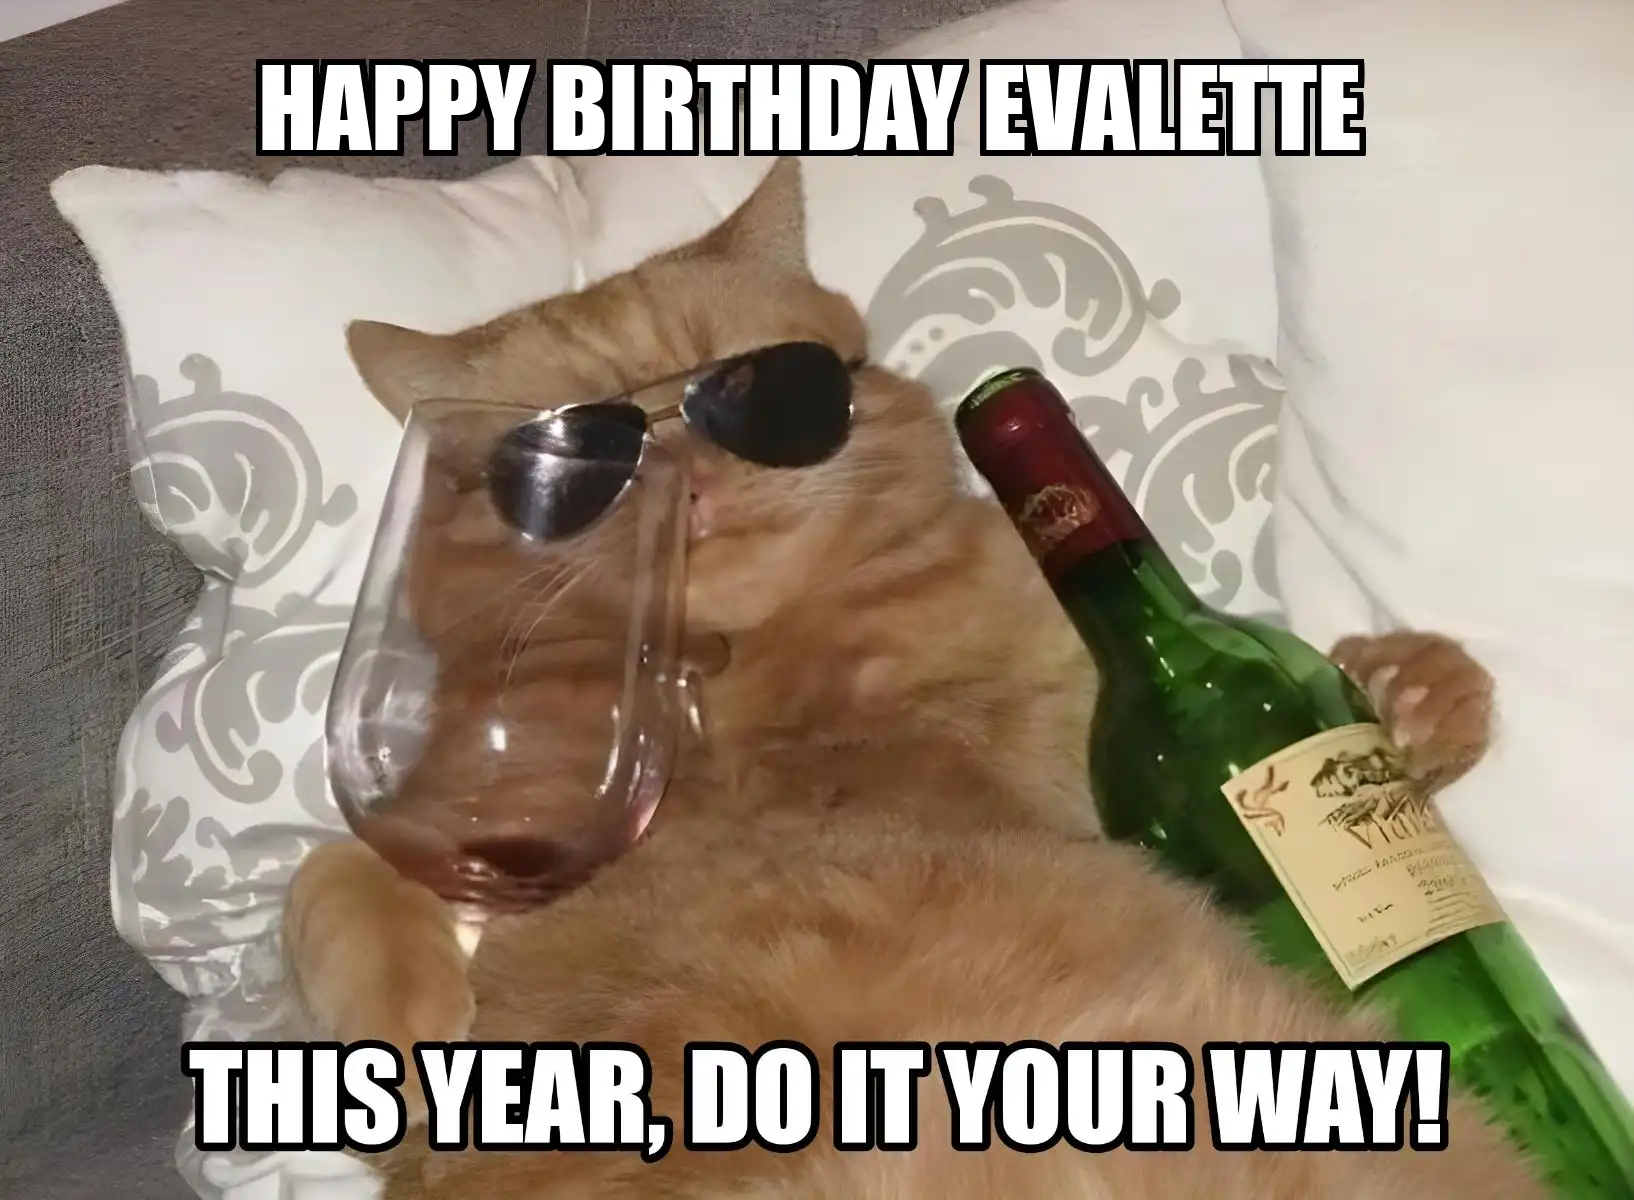 Happy Birthday Evalette This Year Do It Your Way Meme